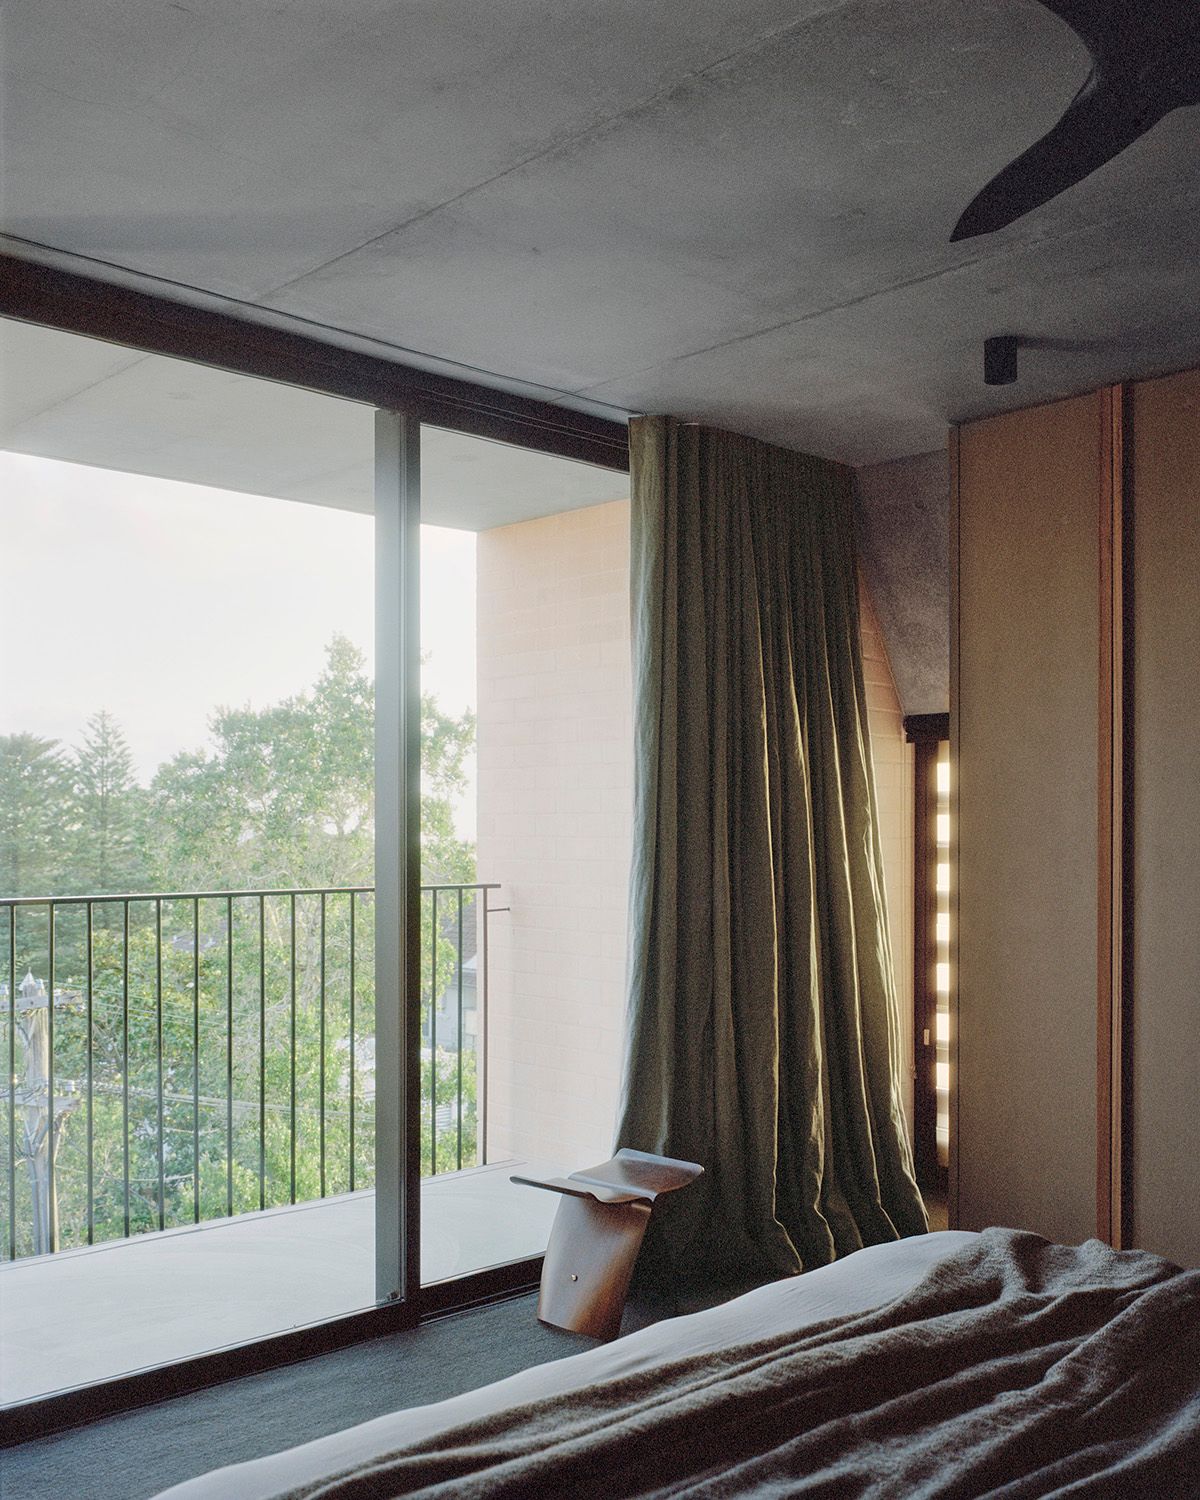 Bronte House by Tribe Studio Architects showing interior view of bedroom looking out large glass sliding doors to a private balcony